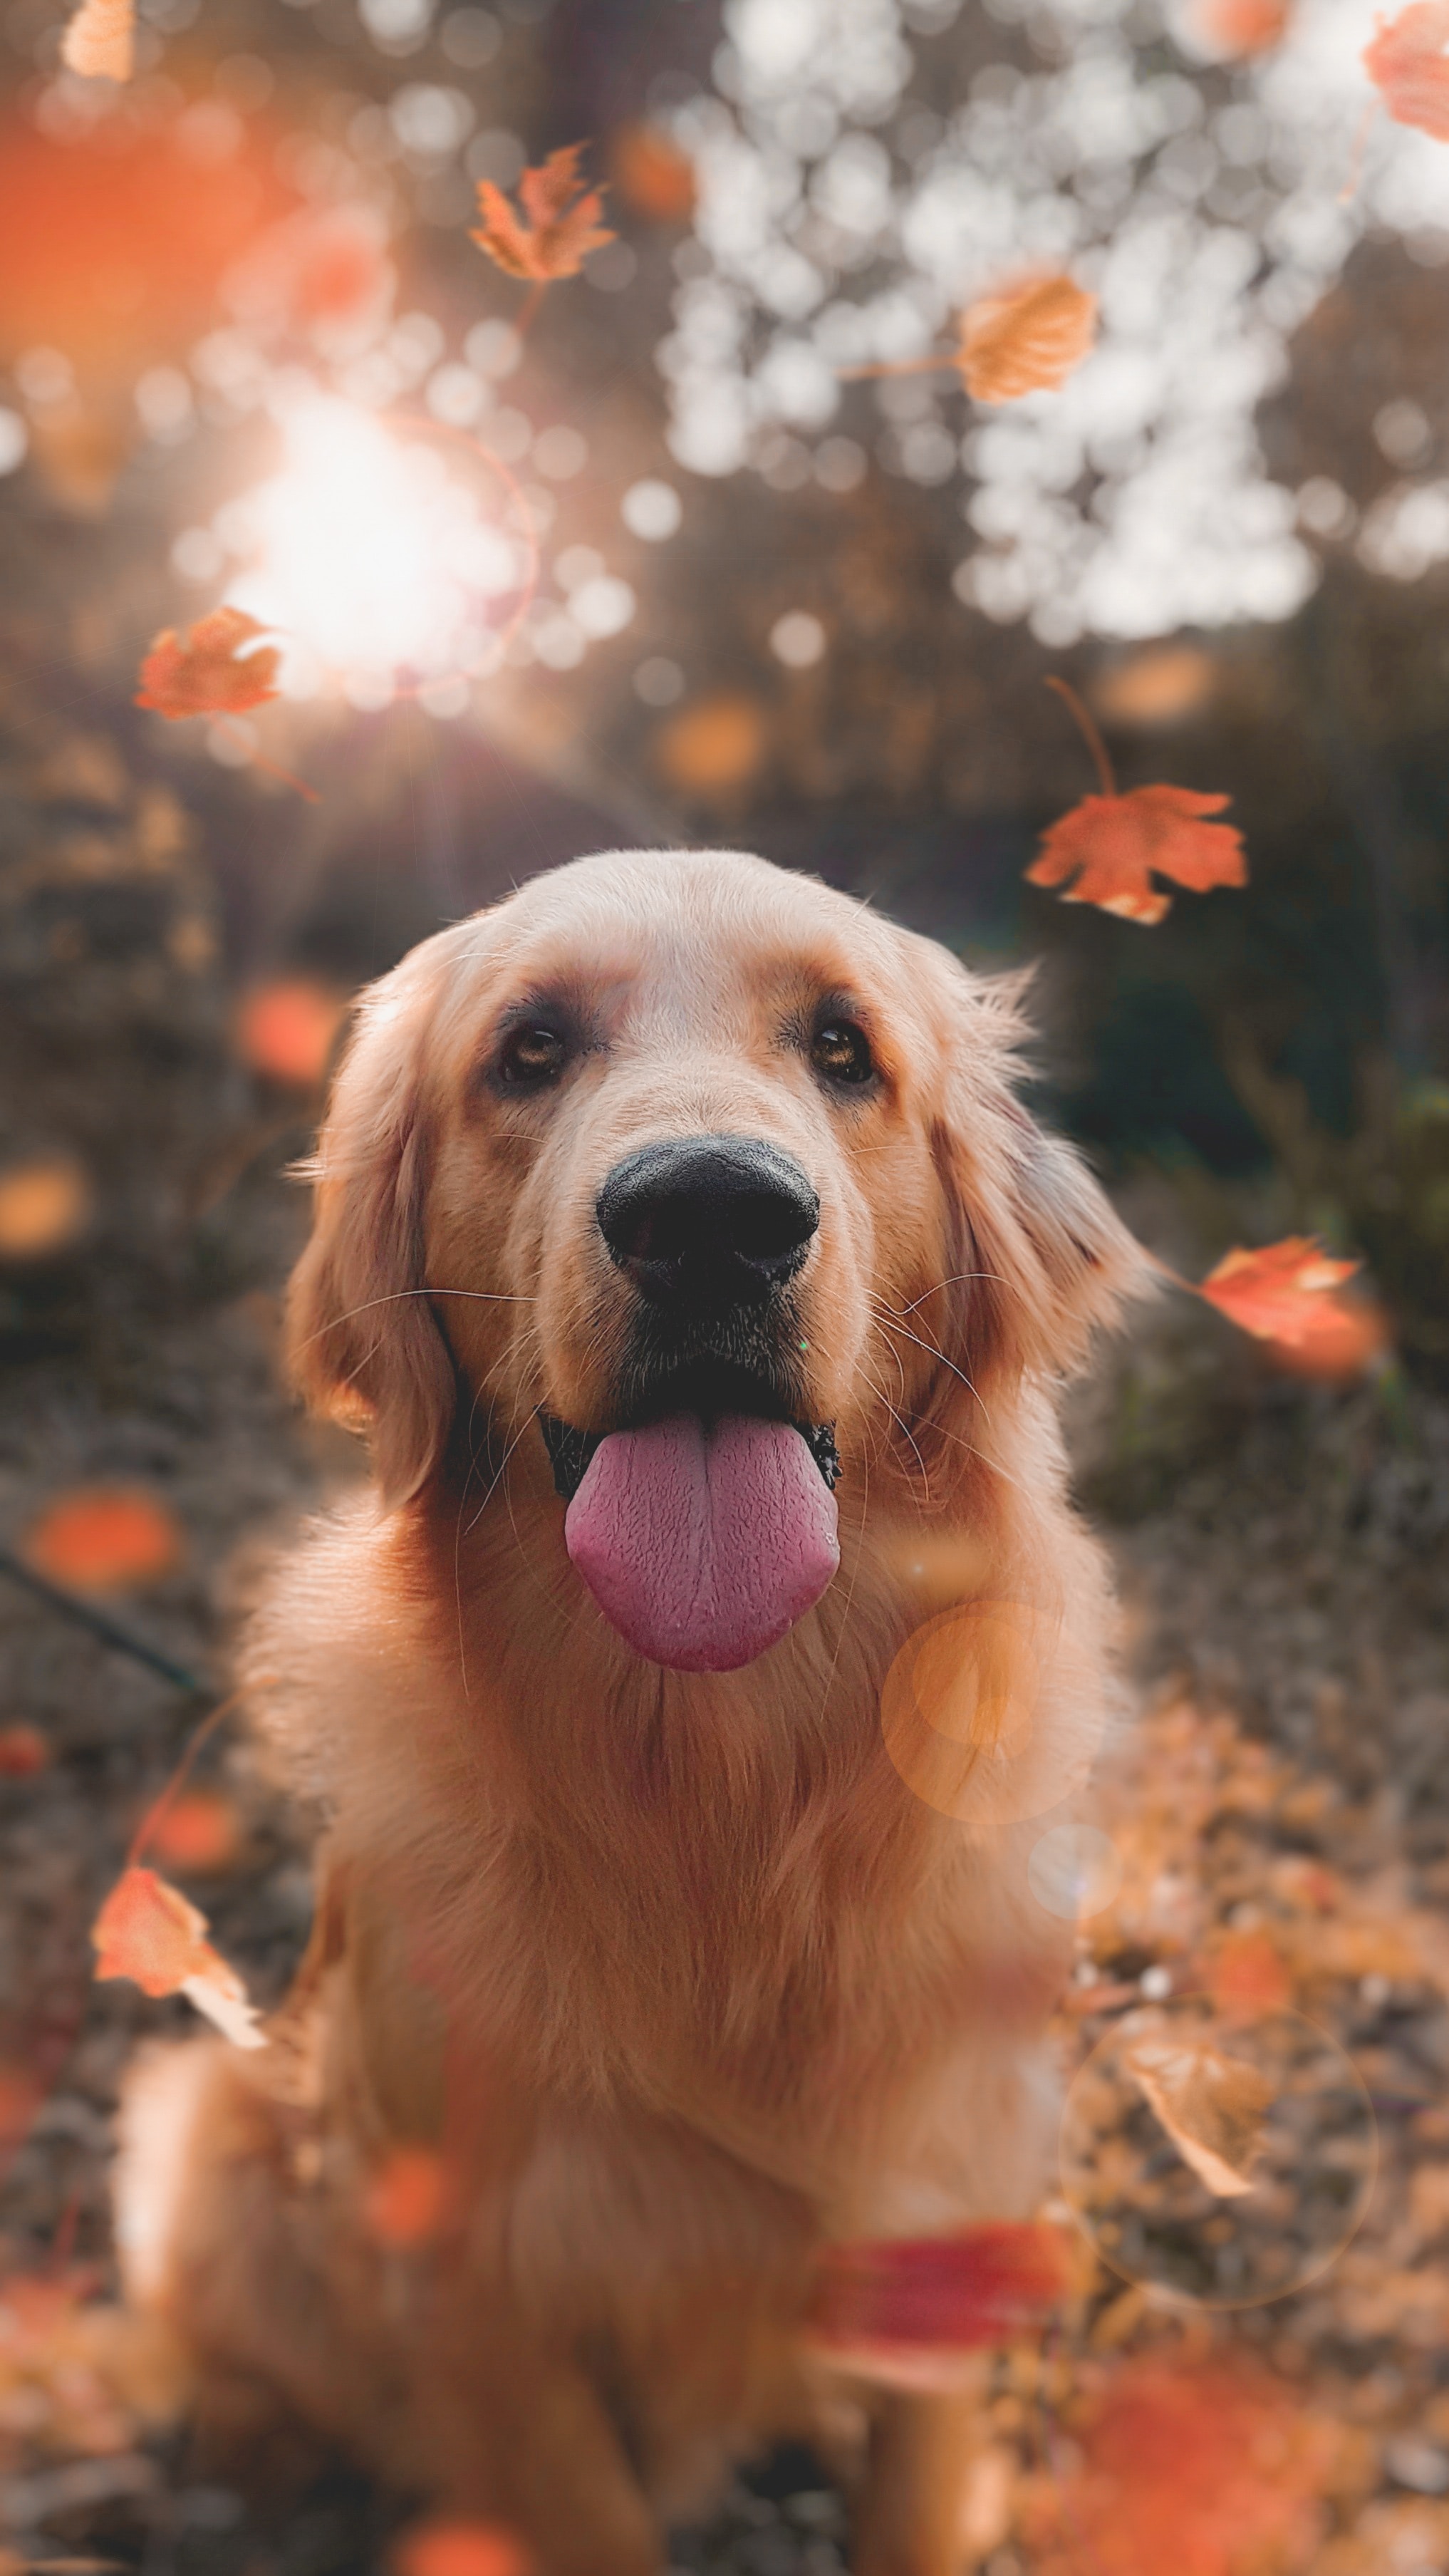 Is Golden Retriever Adoption Right for You?